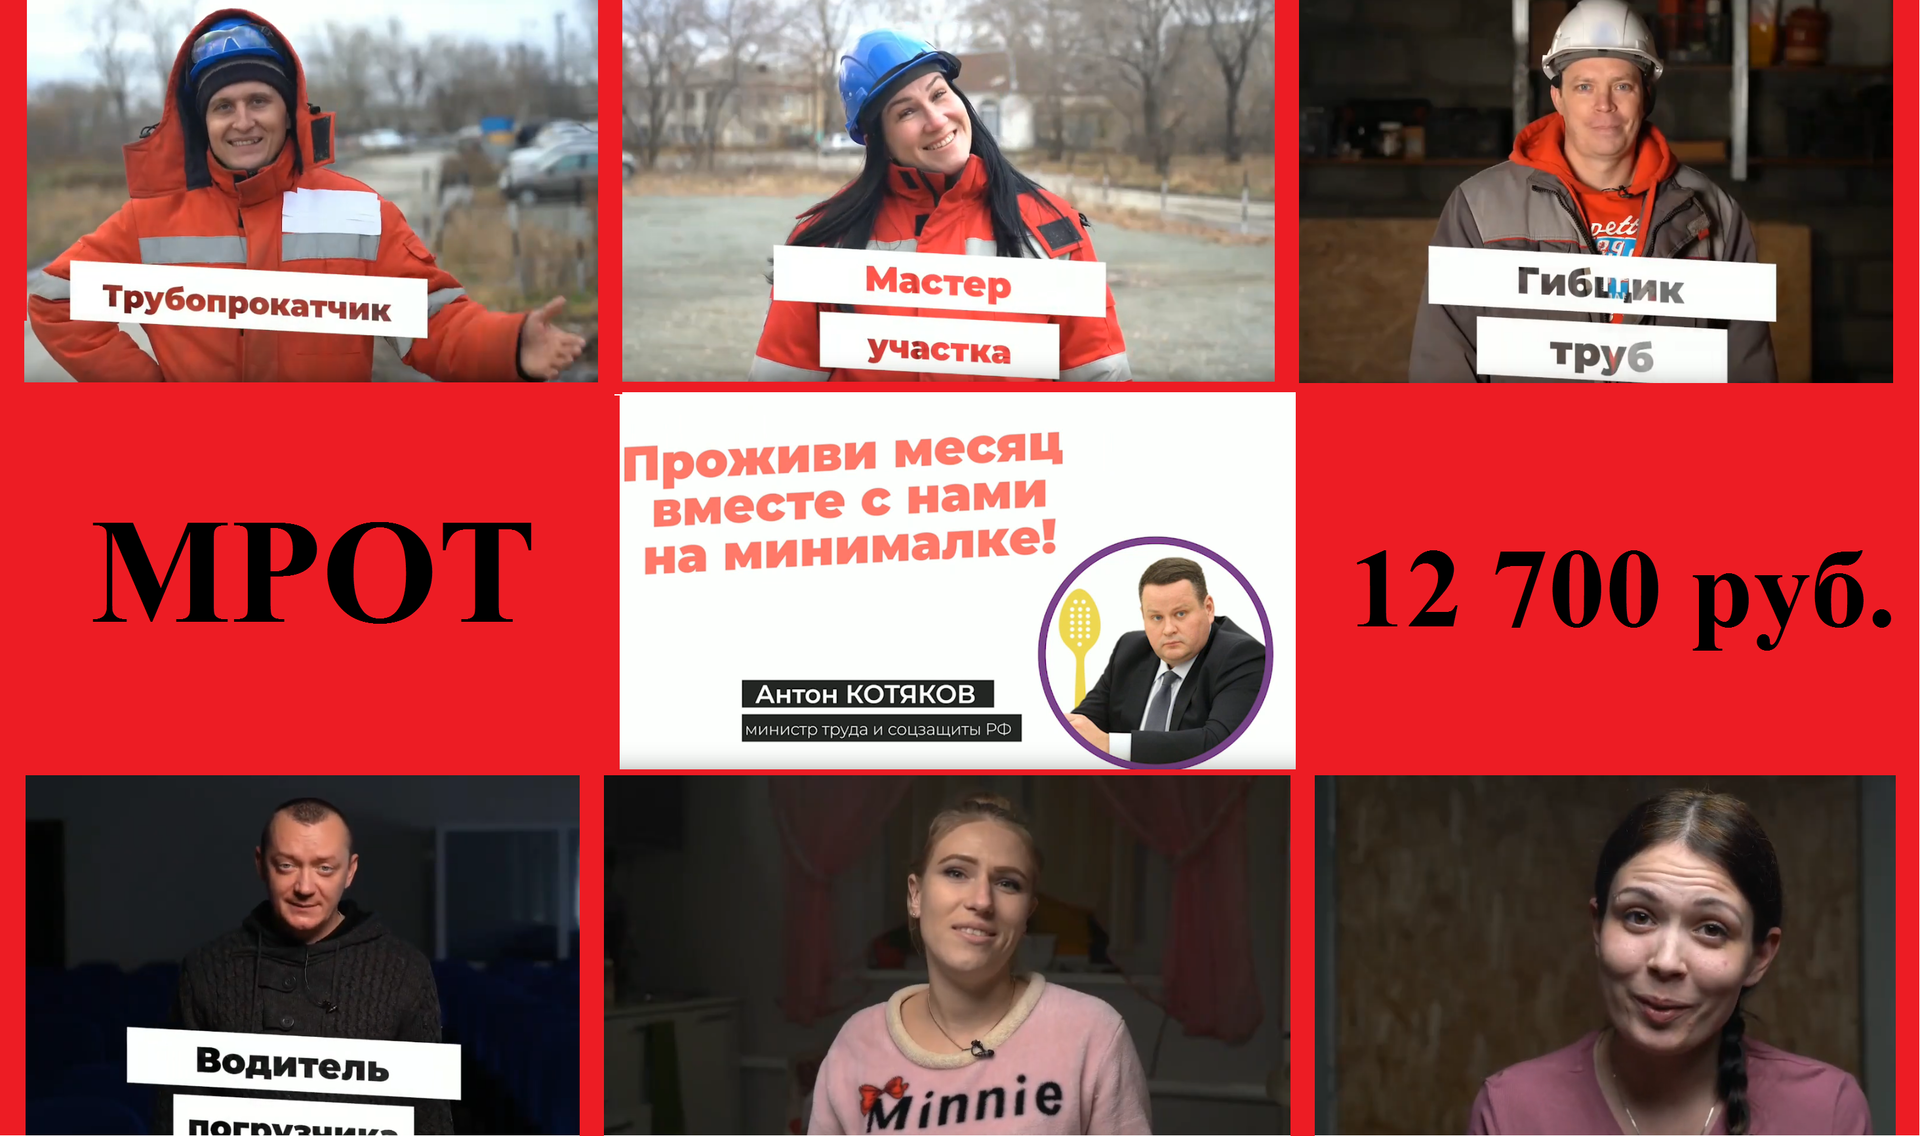 Metallurgists trolled Minister Kotyakov: "Have you lived on this generous minimum wage yourself?"